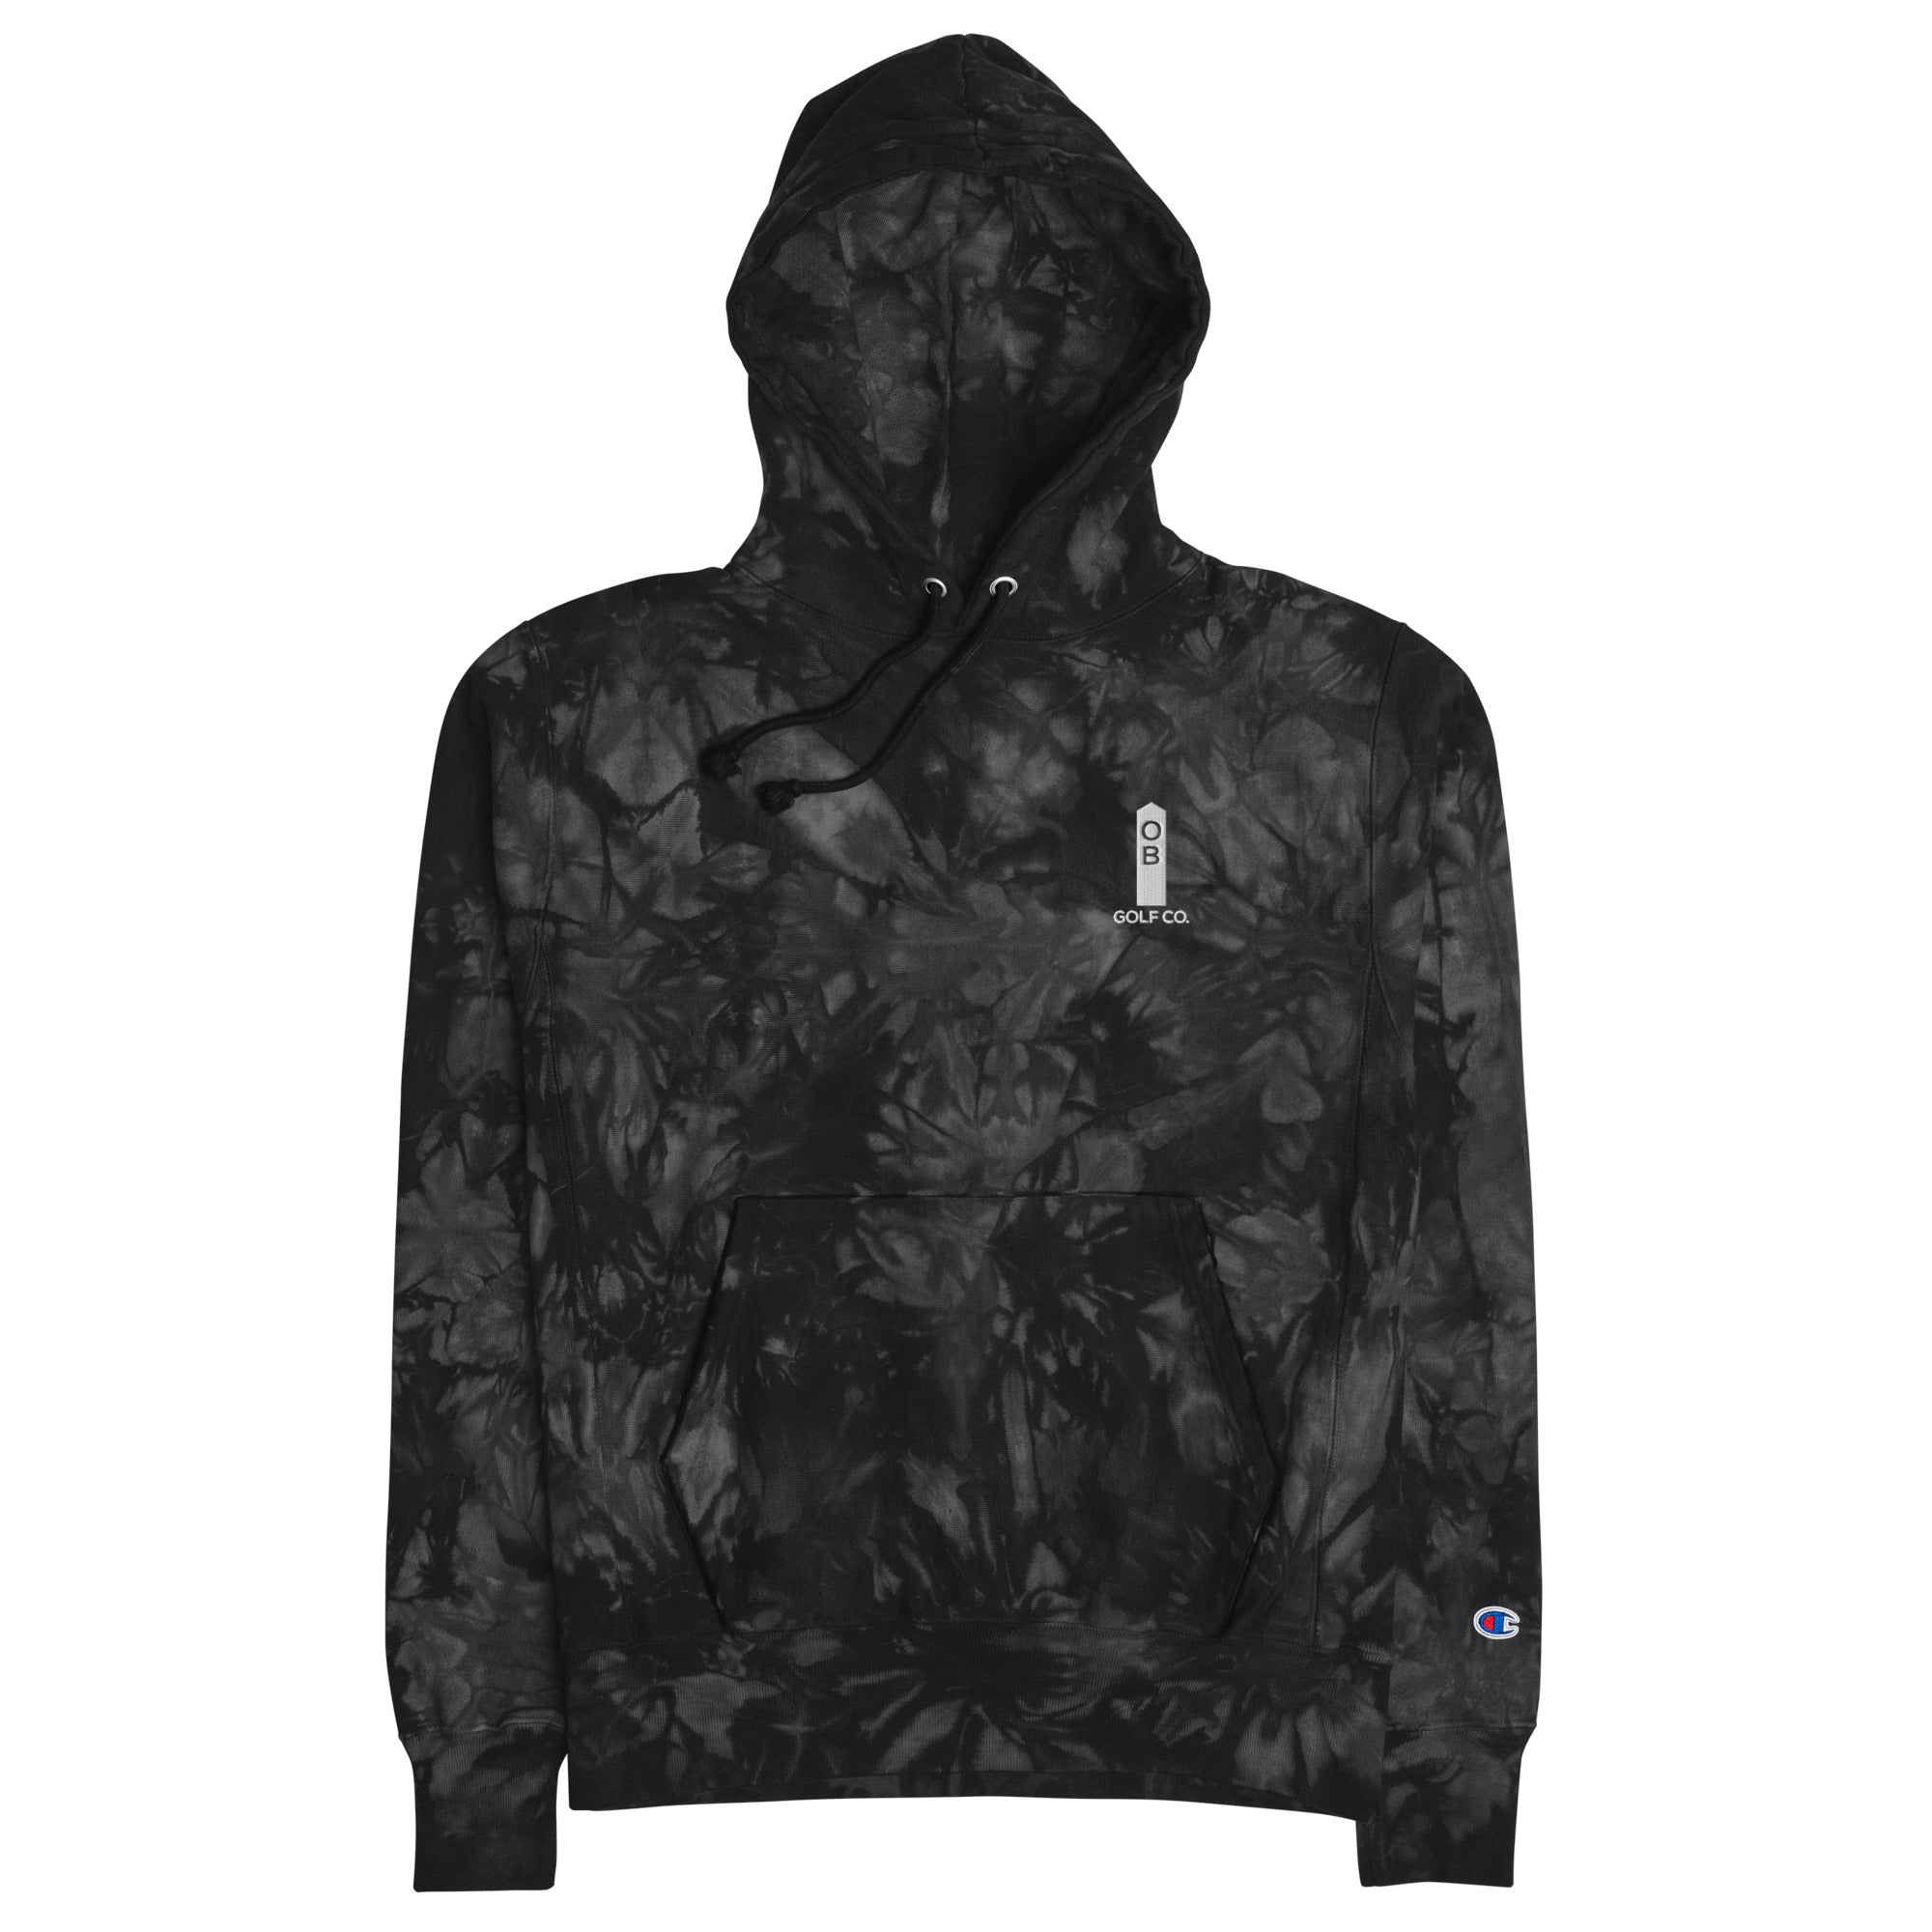 OB Stake Embroidered Champion Tie-Dye Hoodie